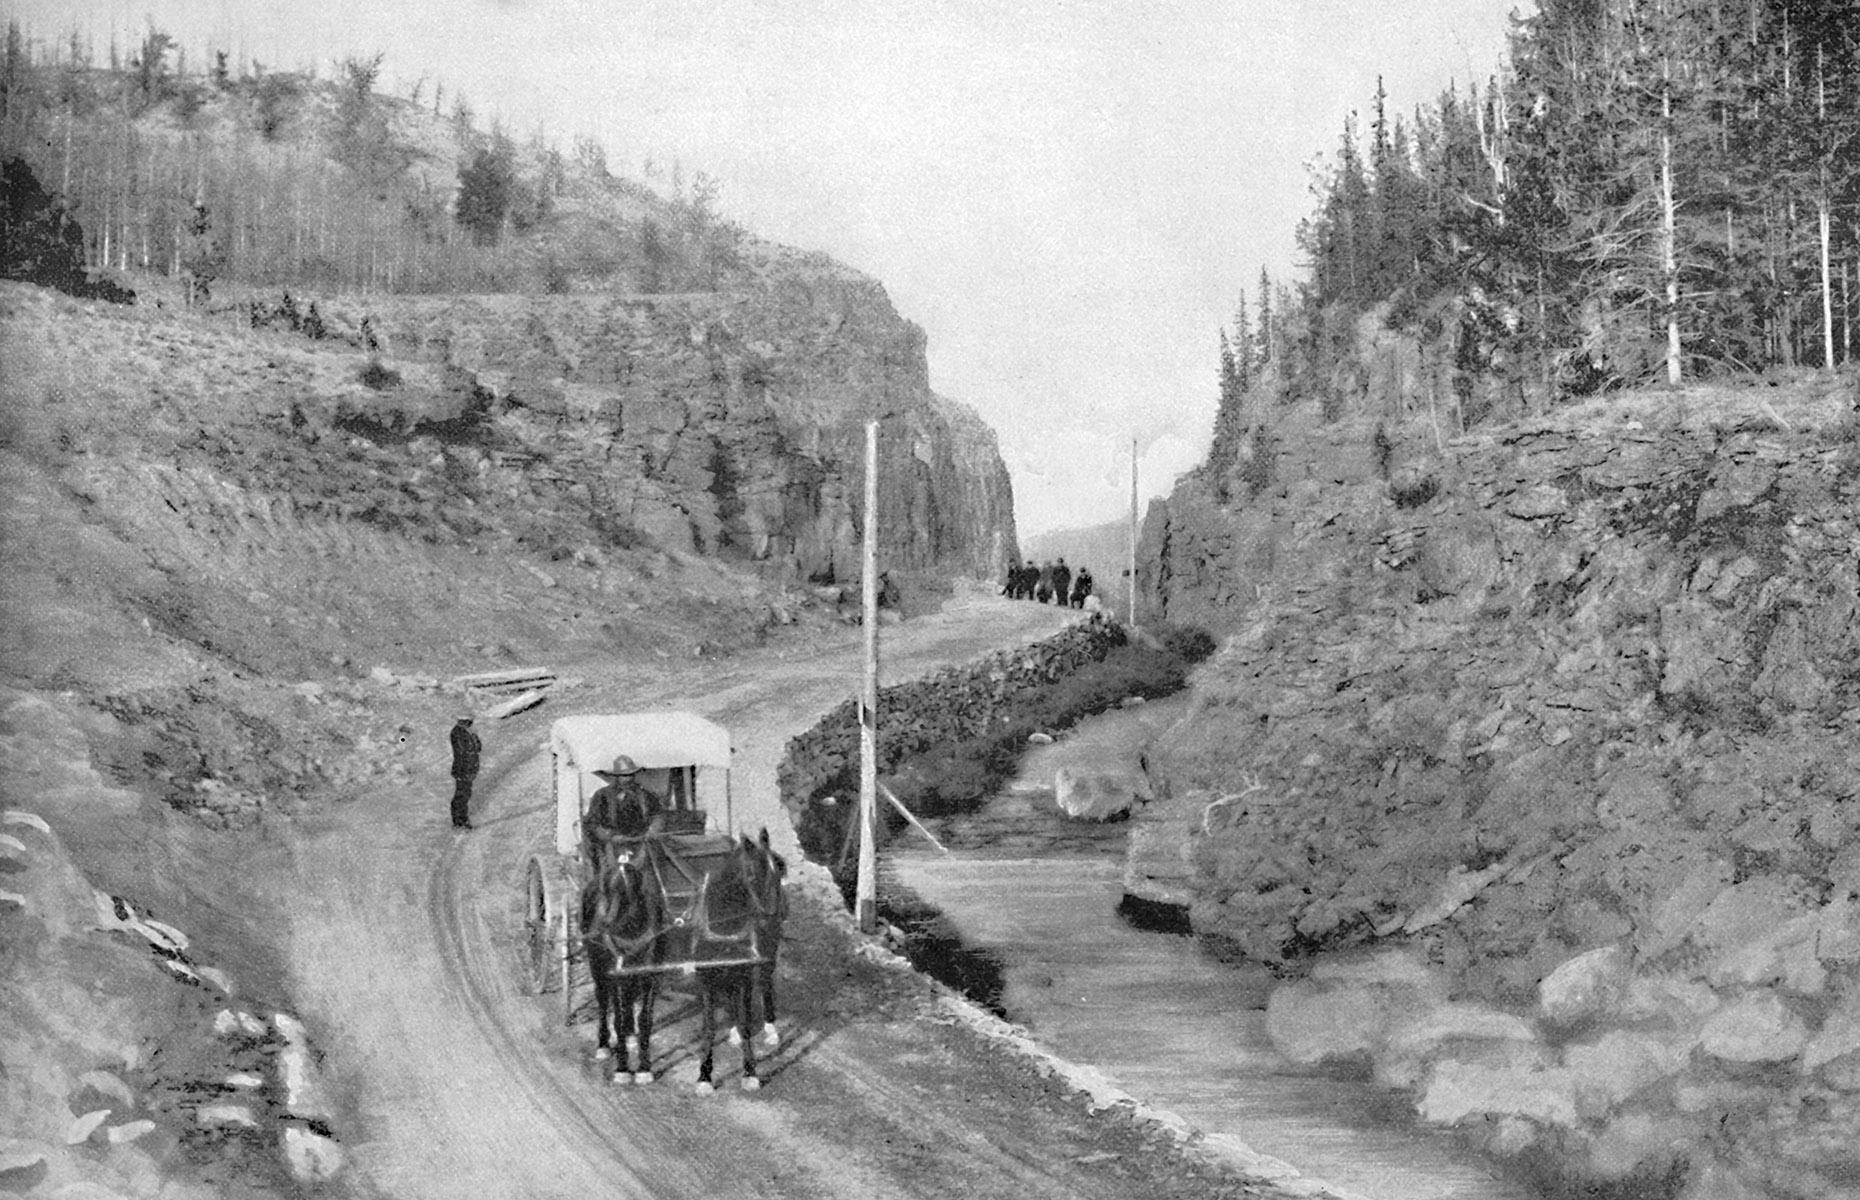 In Yellowstone's early decades, it was administered and safeguarded by the US army, who kept this role until 1918. The entrance to the park is photographed here in 1897.